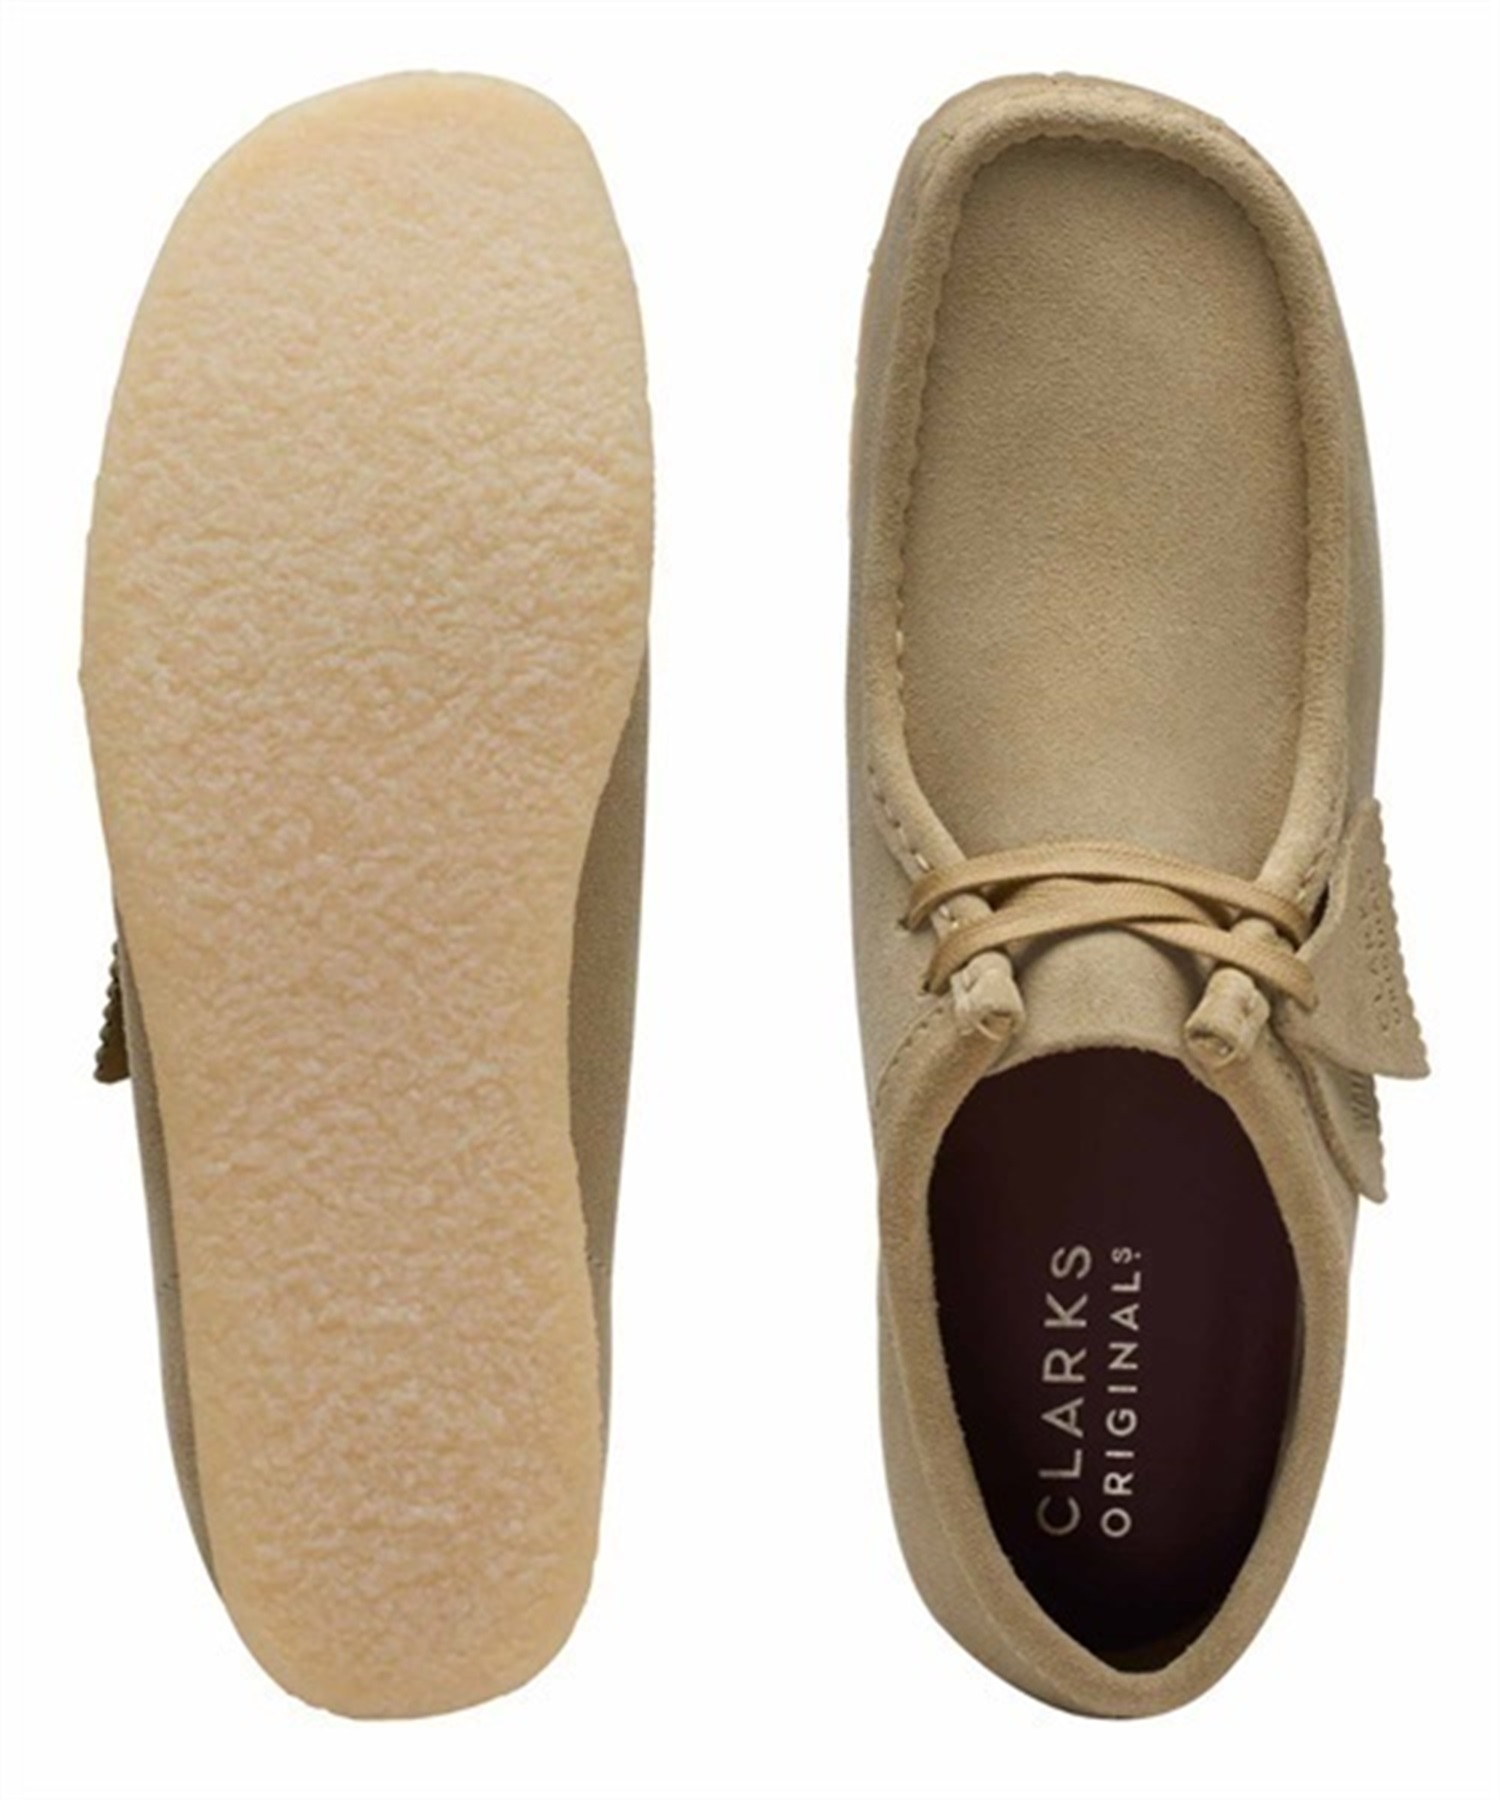 Clarks wallabees ワラビー 26.5 メープルスエード - 靴